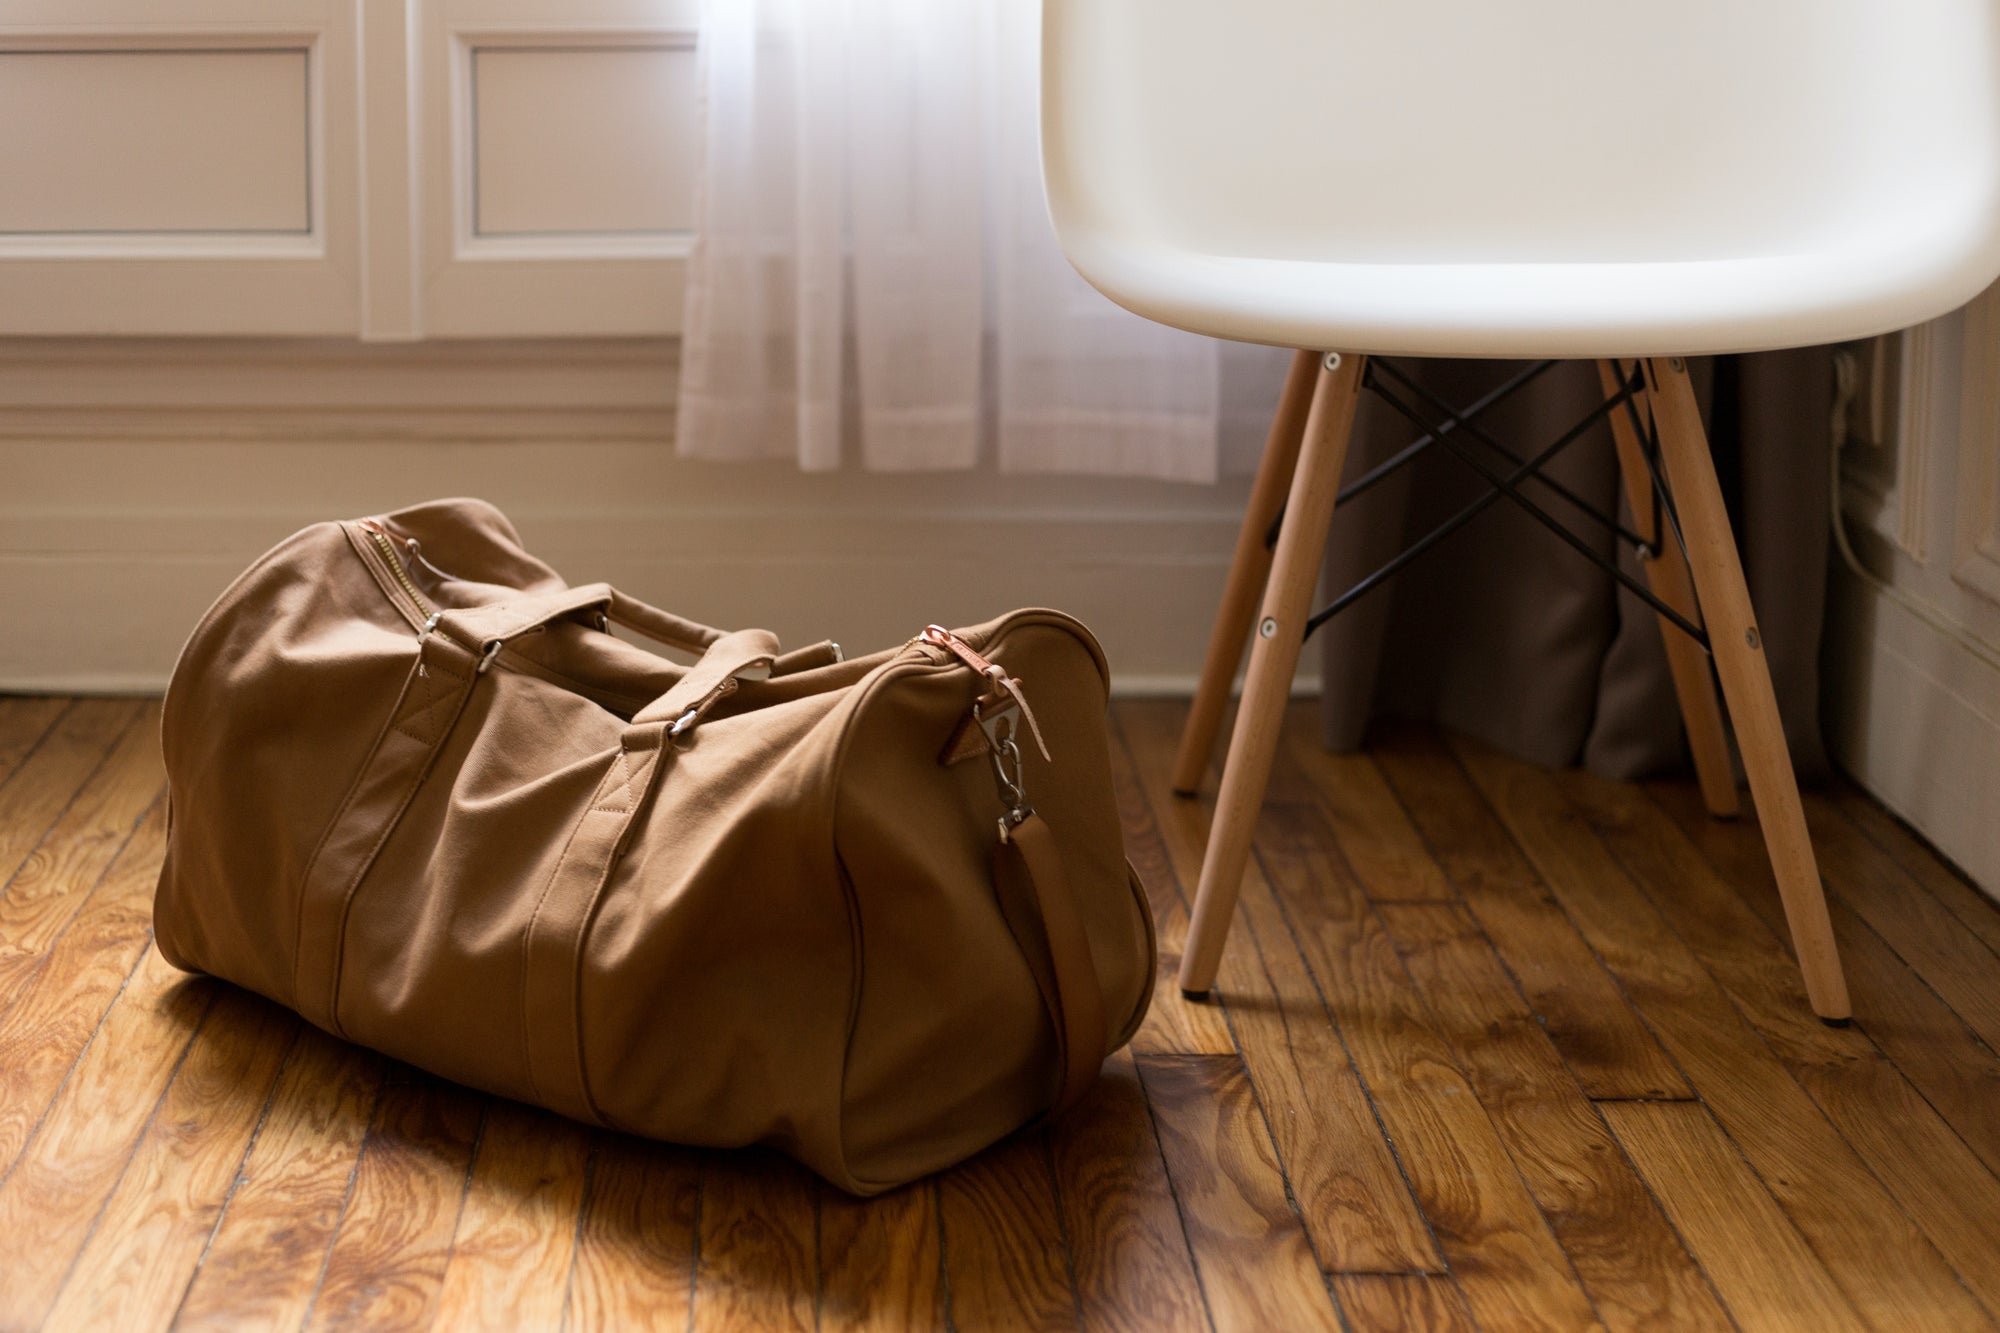 Our Top 5 Necessities to Organize Your Luggage